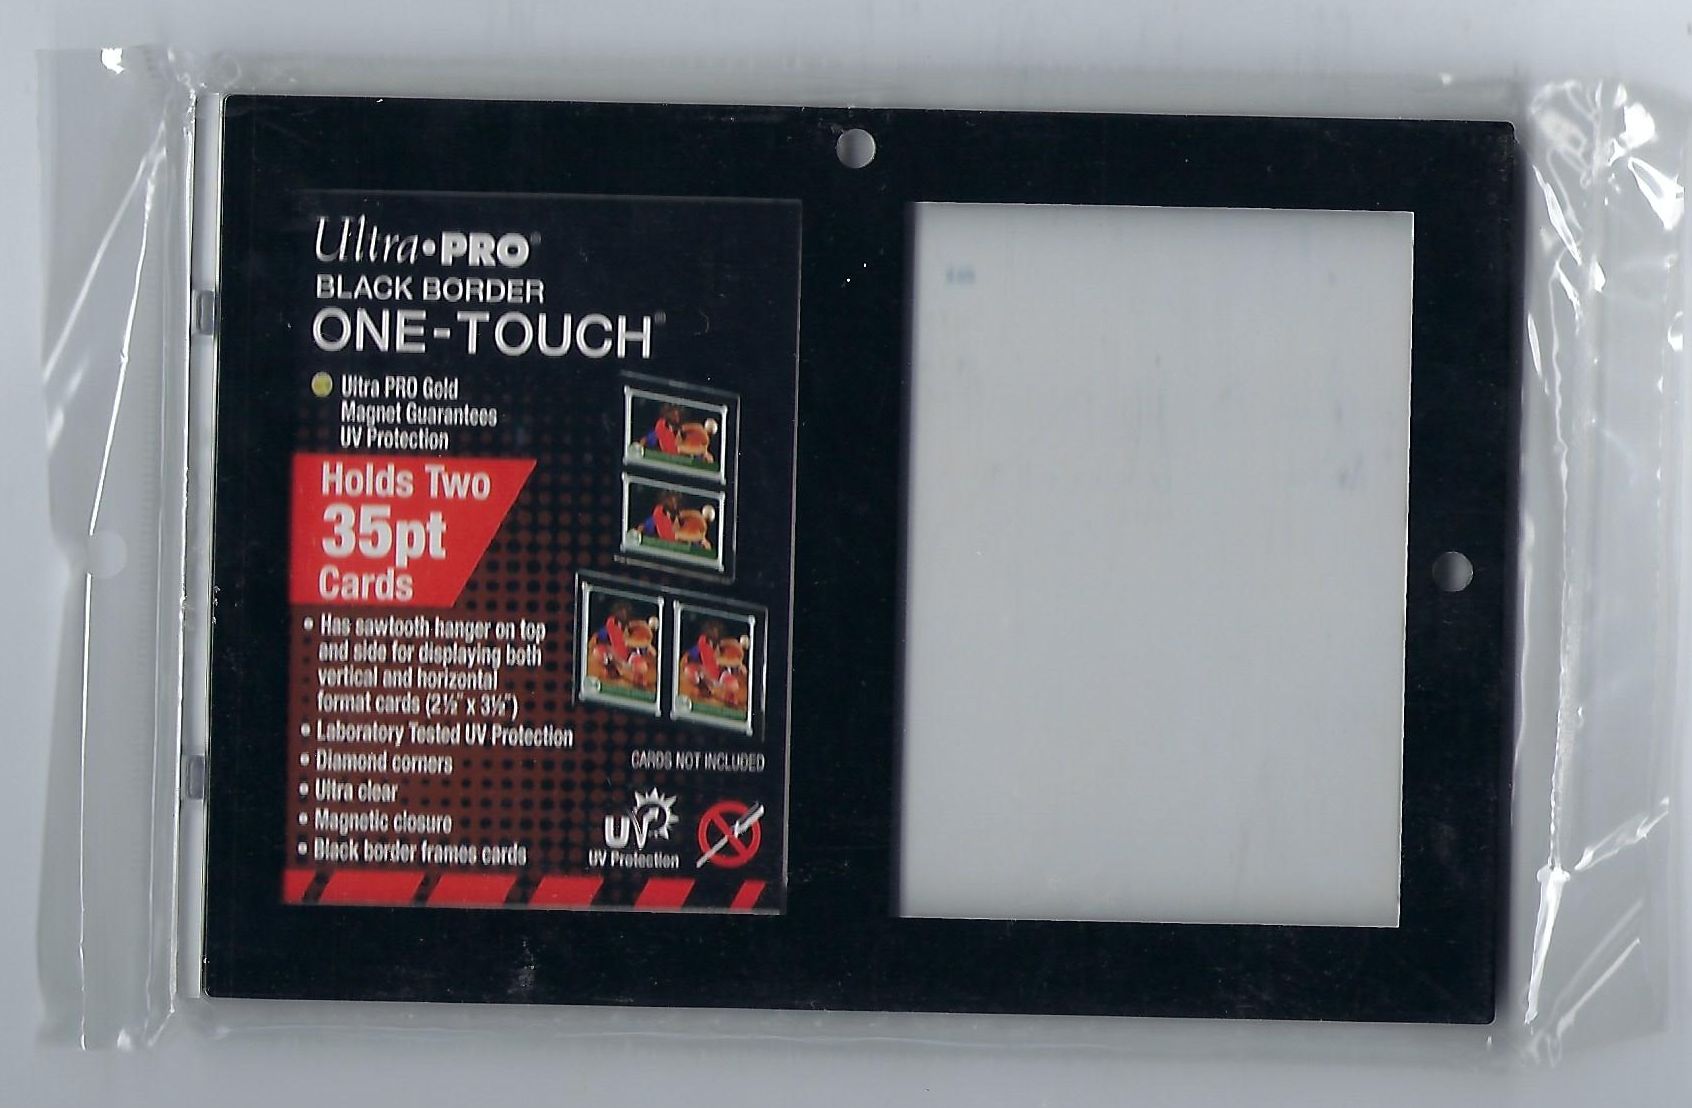 Ultra Pro Black-Bordered Magnetic One-Touch Holders 35pt 2 card holder